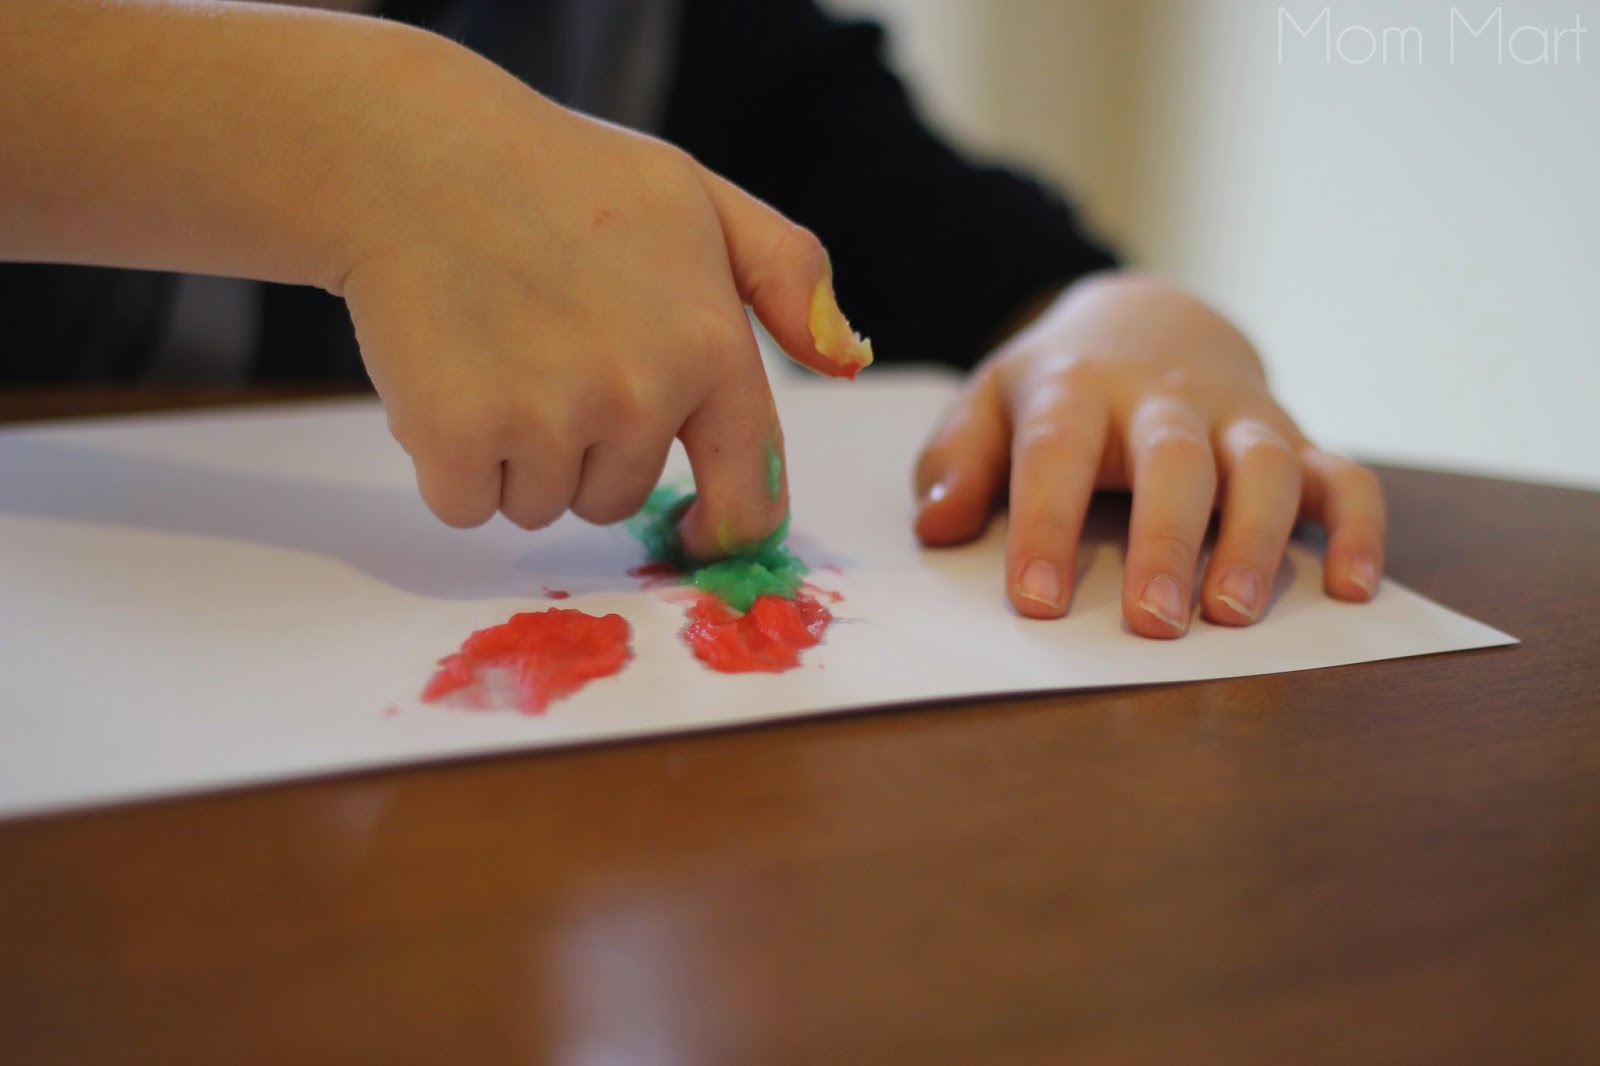 DIY Homemade Finger Paint Recipe - finger painting recipe to make with kids